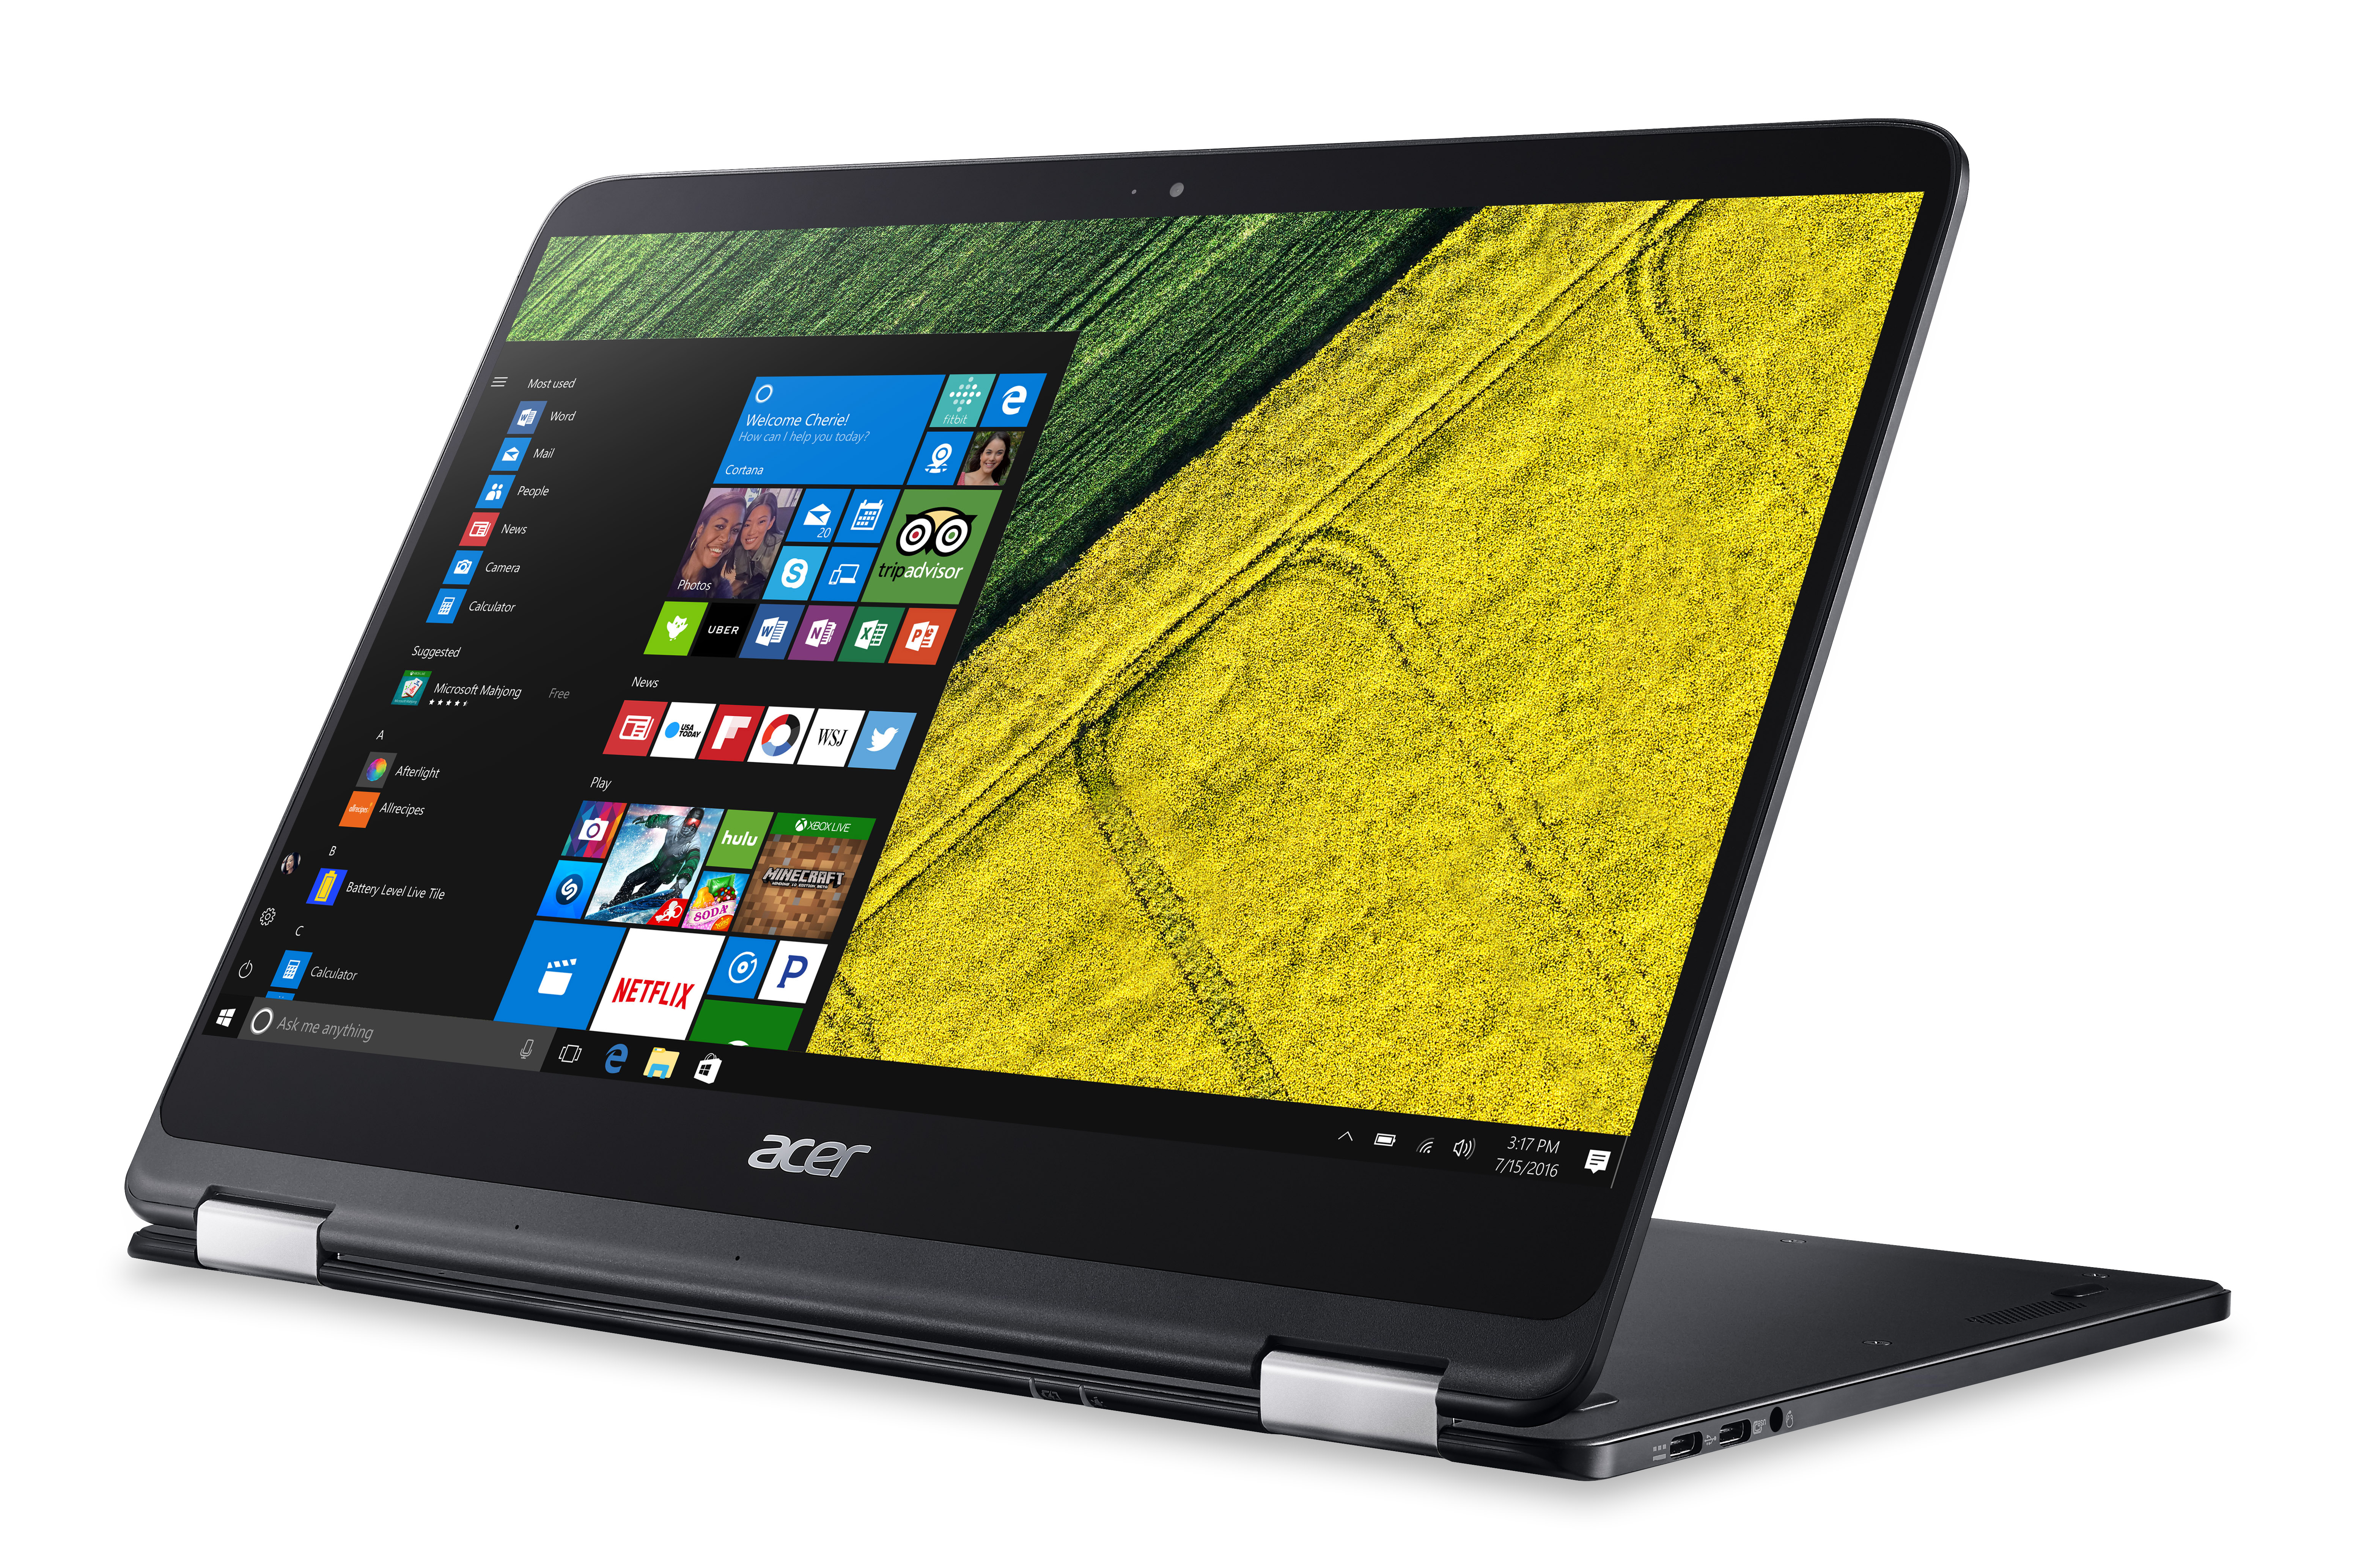 The Acer Spin 7 with Windows 10